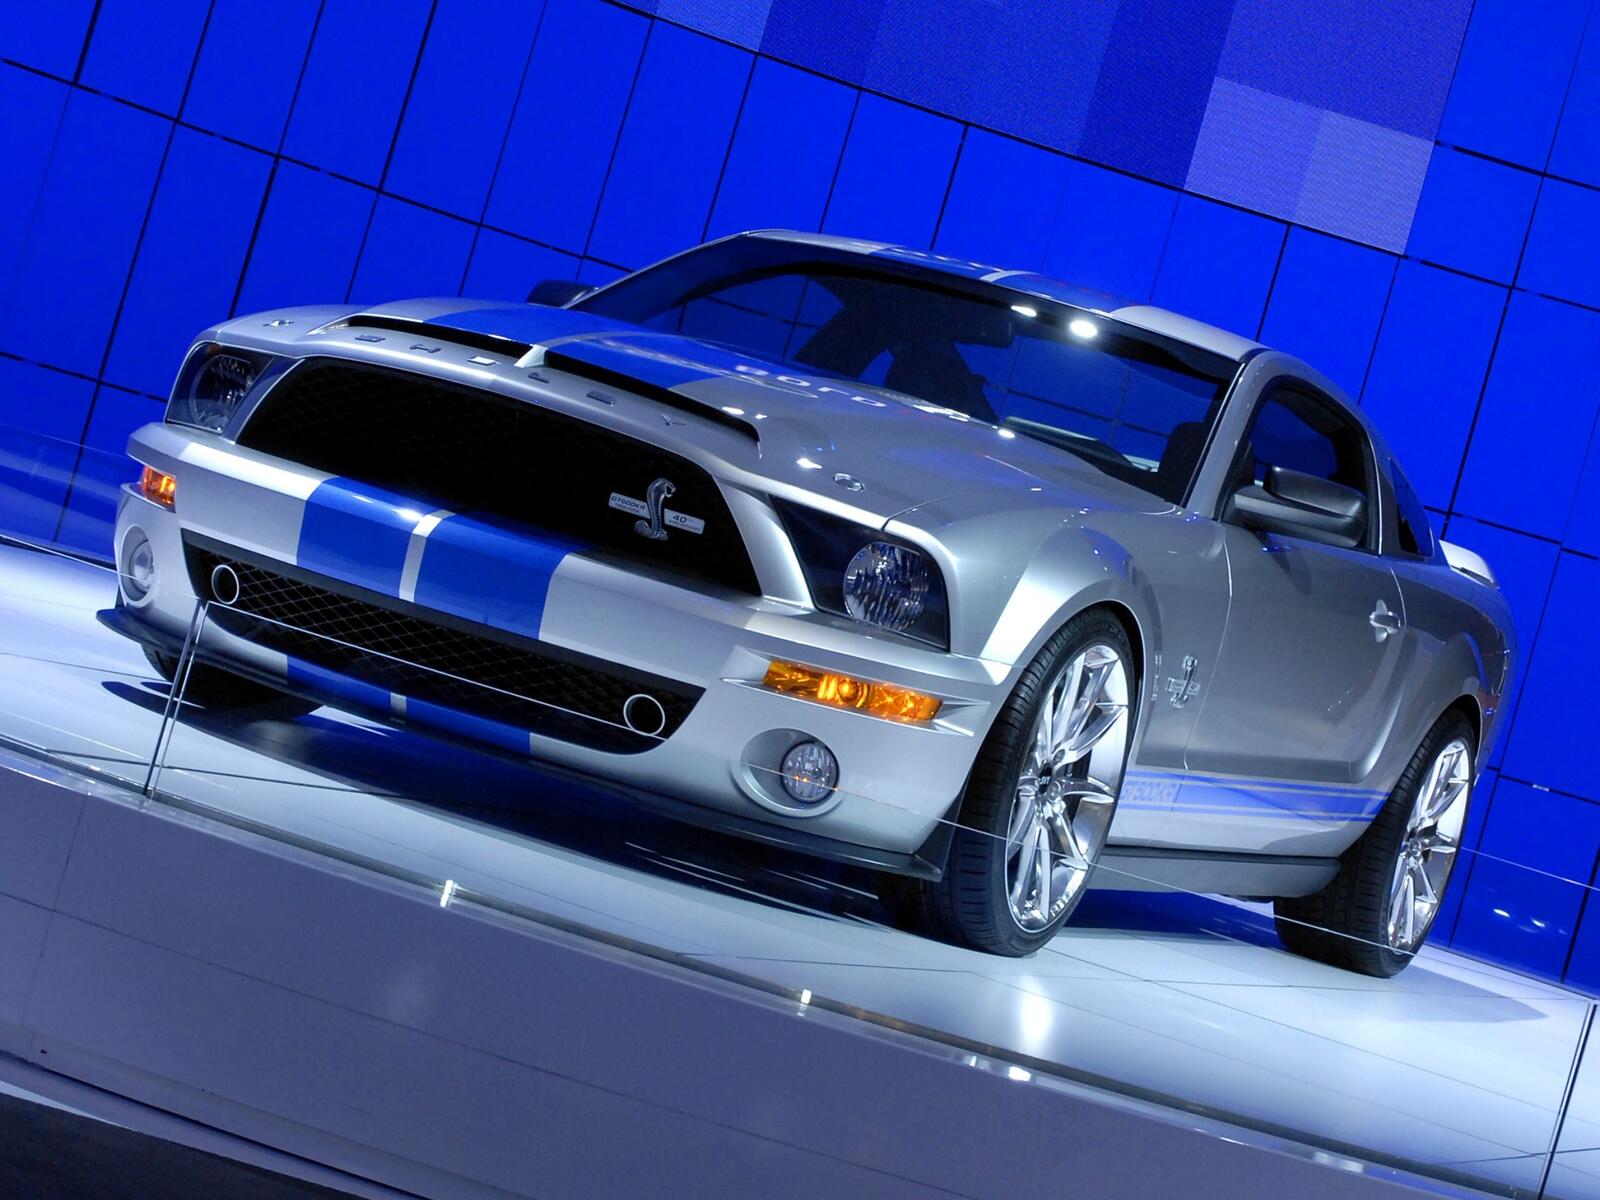 Wallpapers supercar cars wallpaper ford mustang shelby gt 500 on the desktop